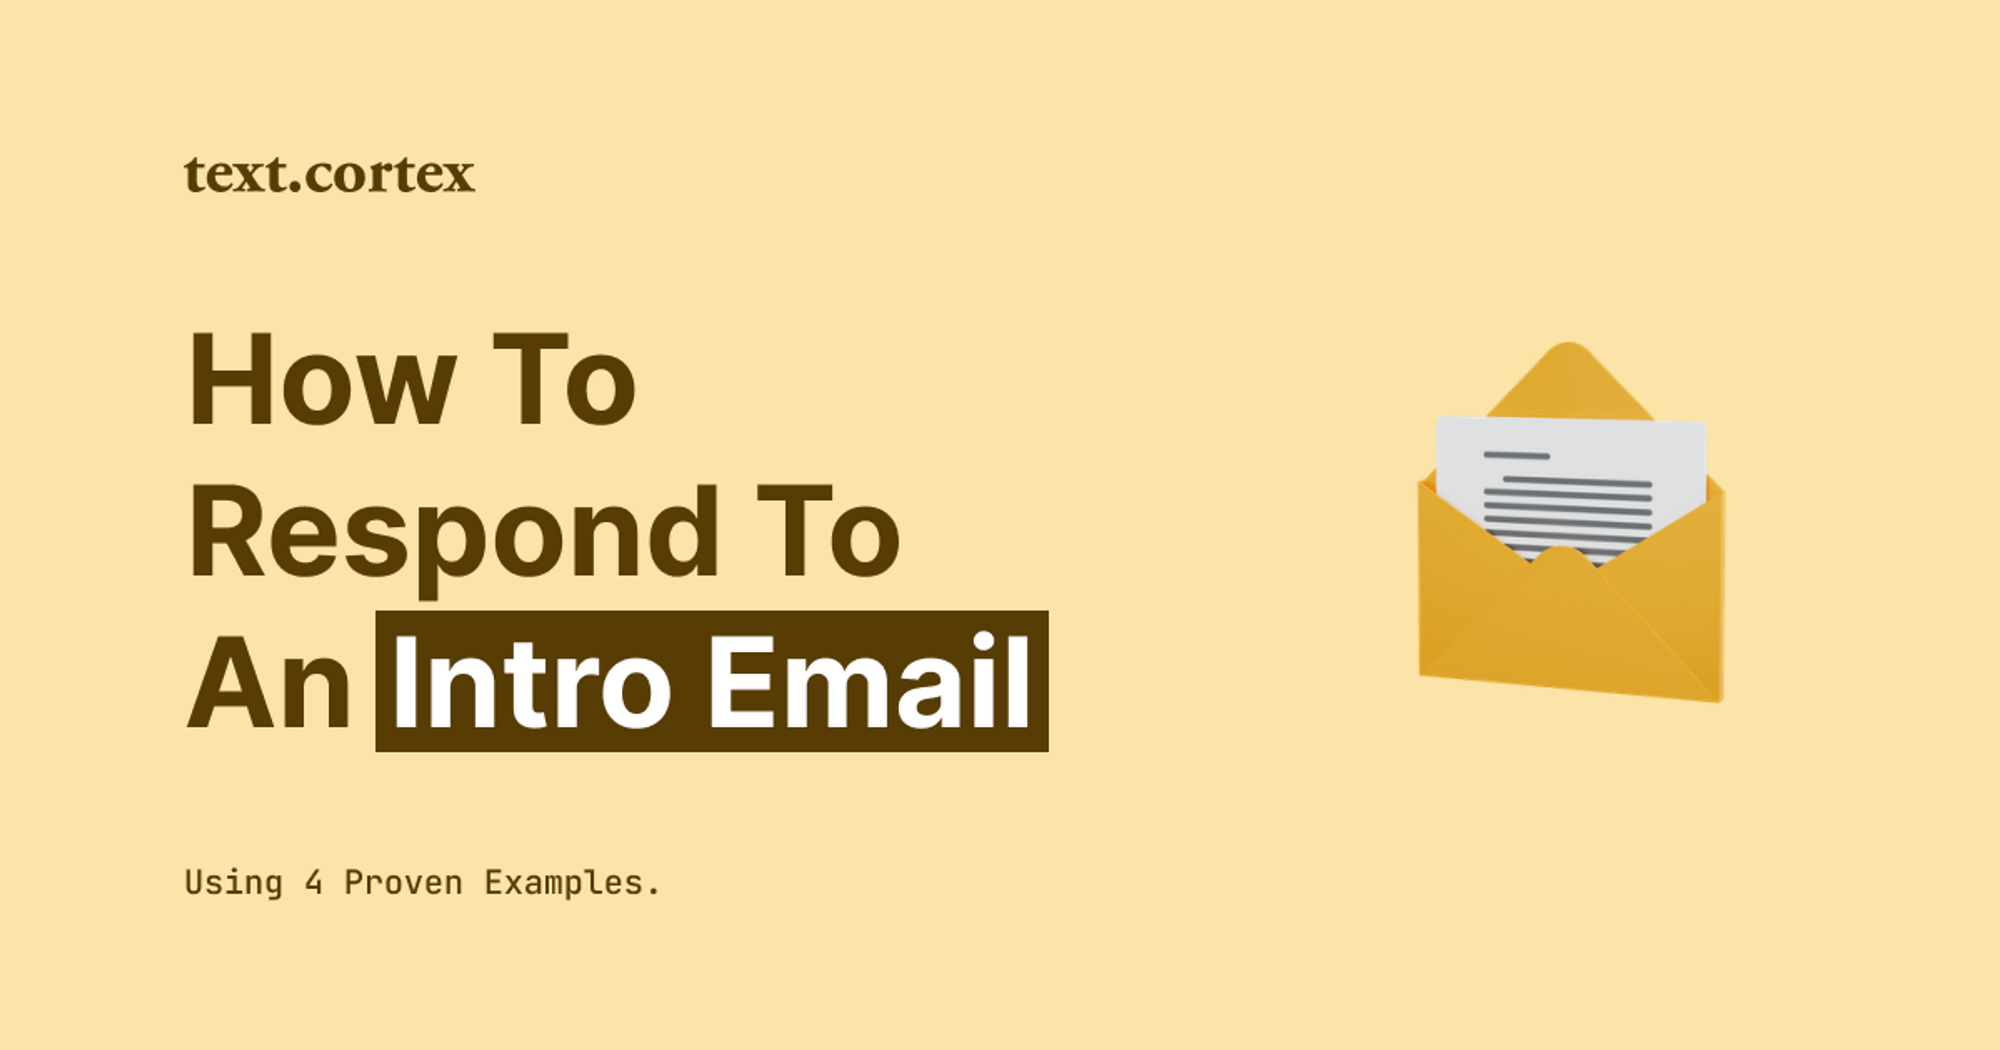 How To Respond to an Intro Email Using 4 Proven Tips